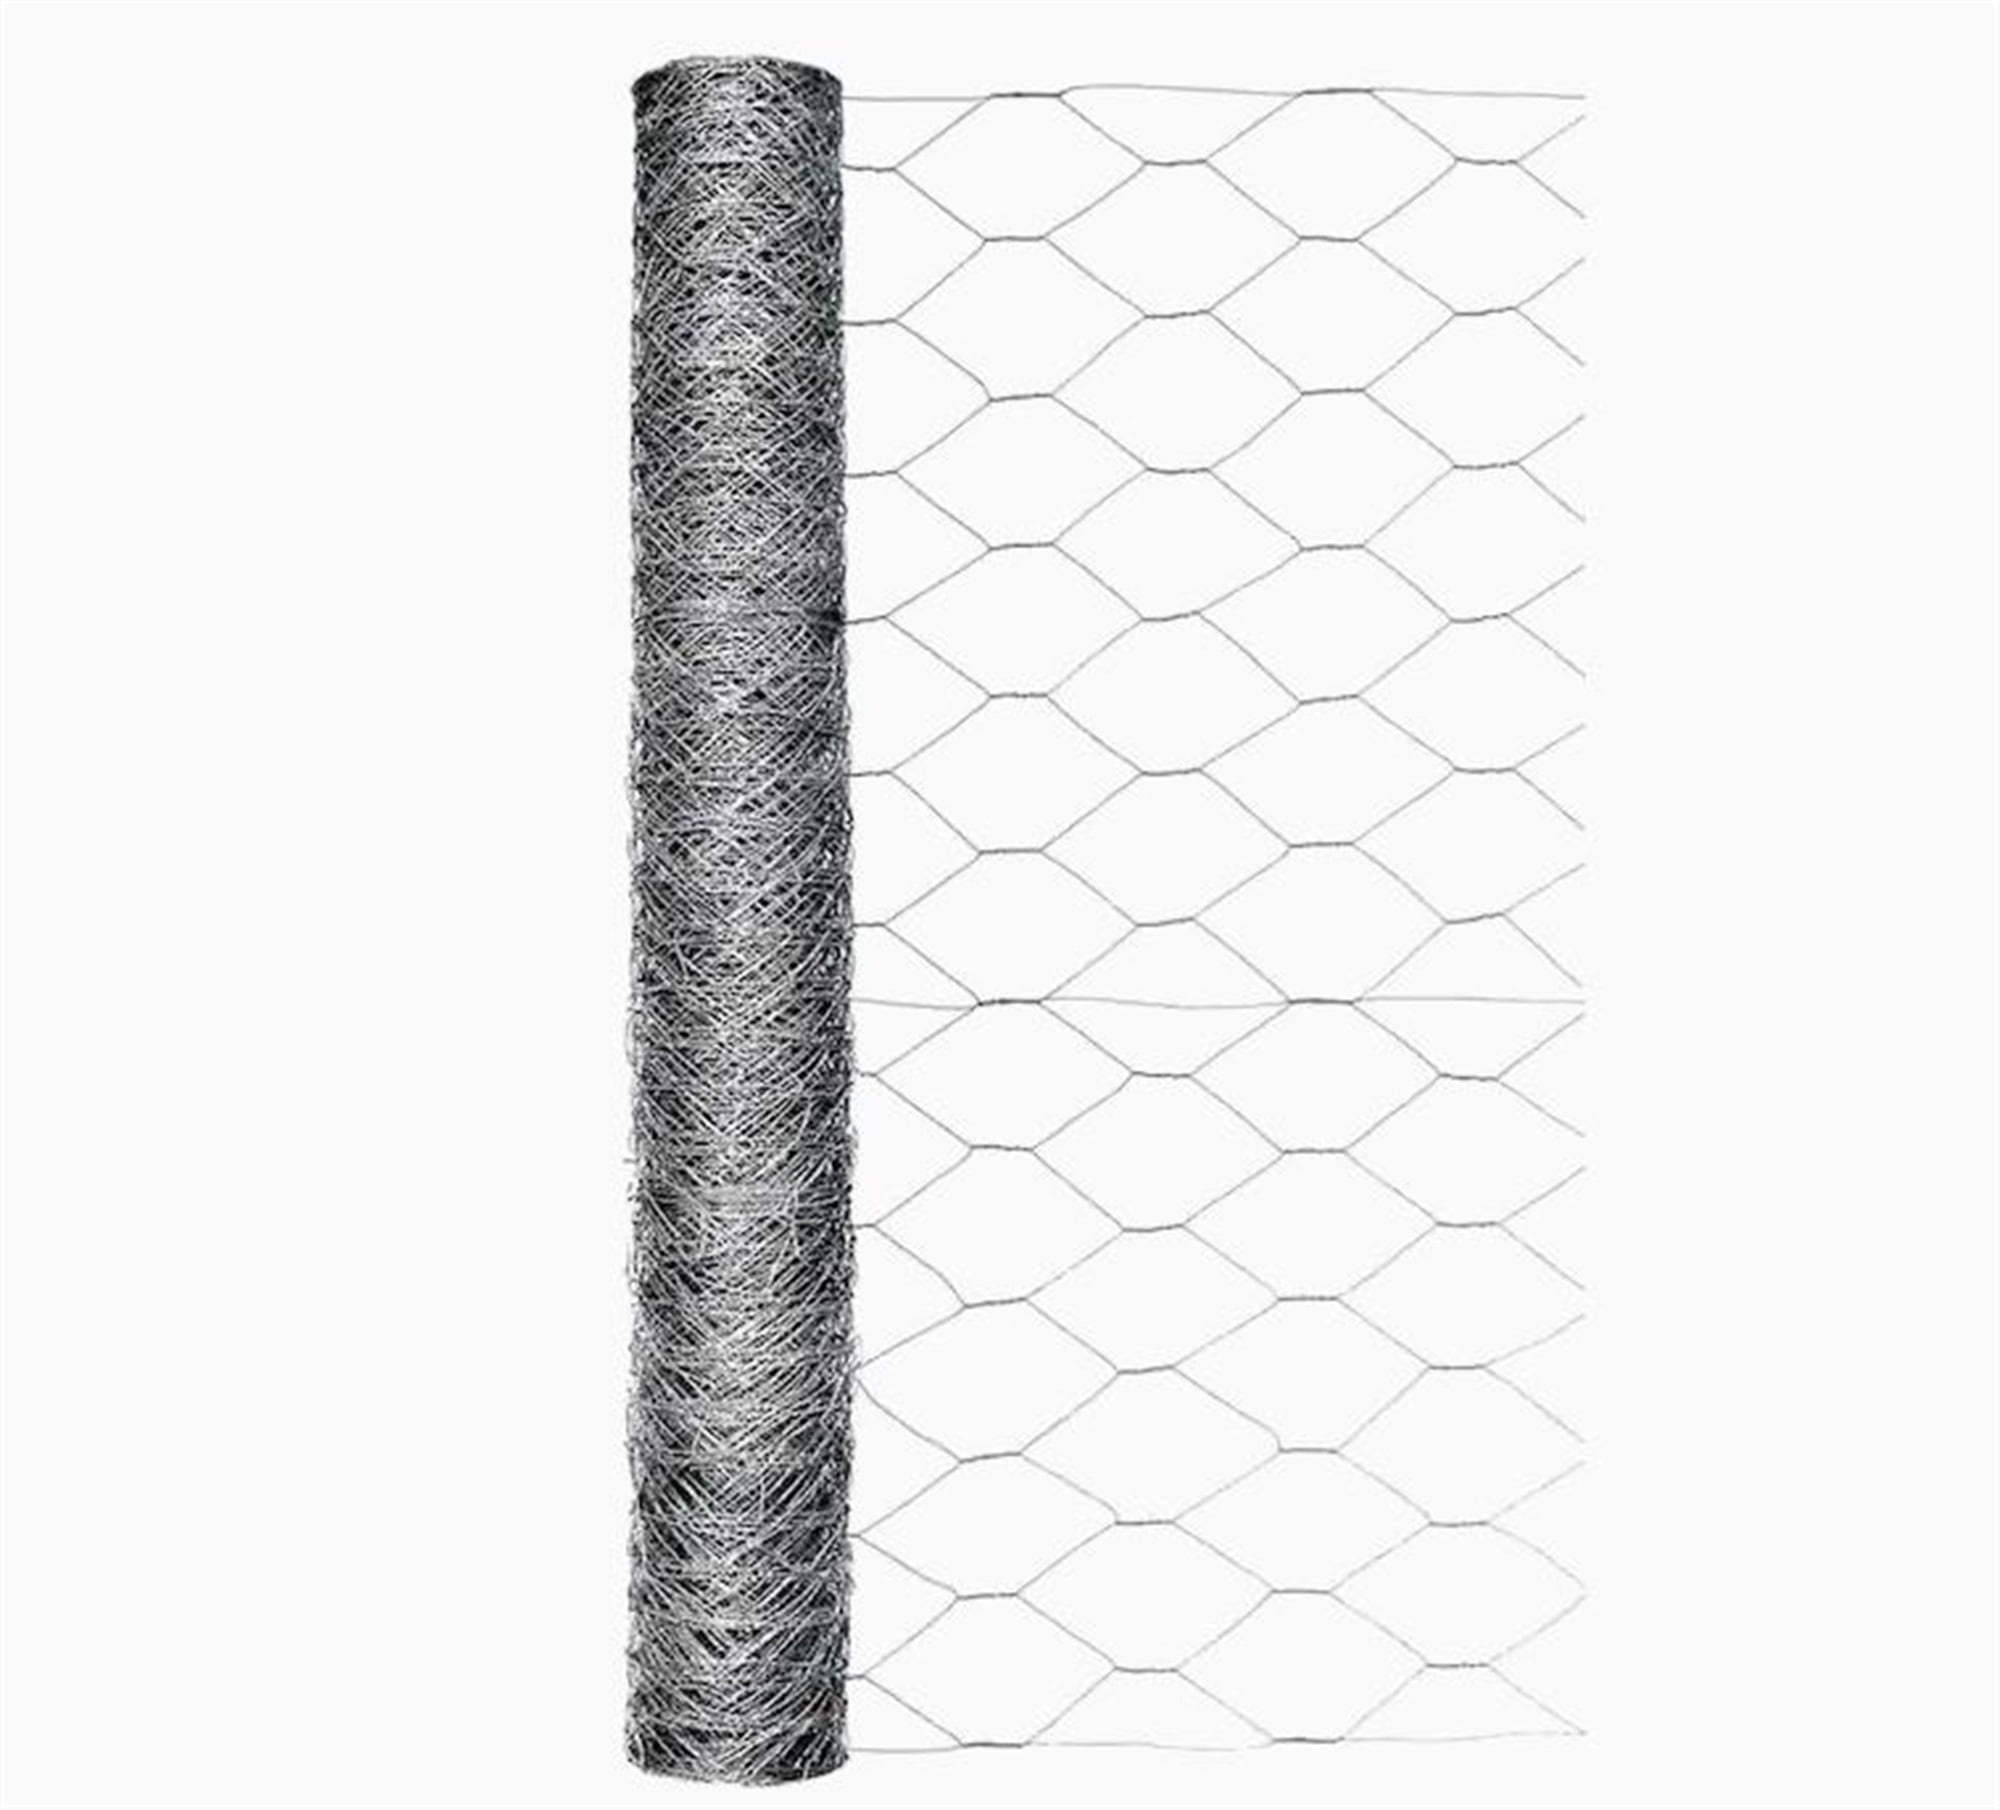 Galvanized Poultry Net Metal Mesh Fencing Chicken Wire 2 Holes Rustic  72x150